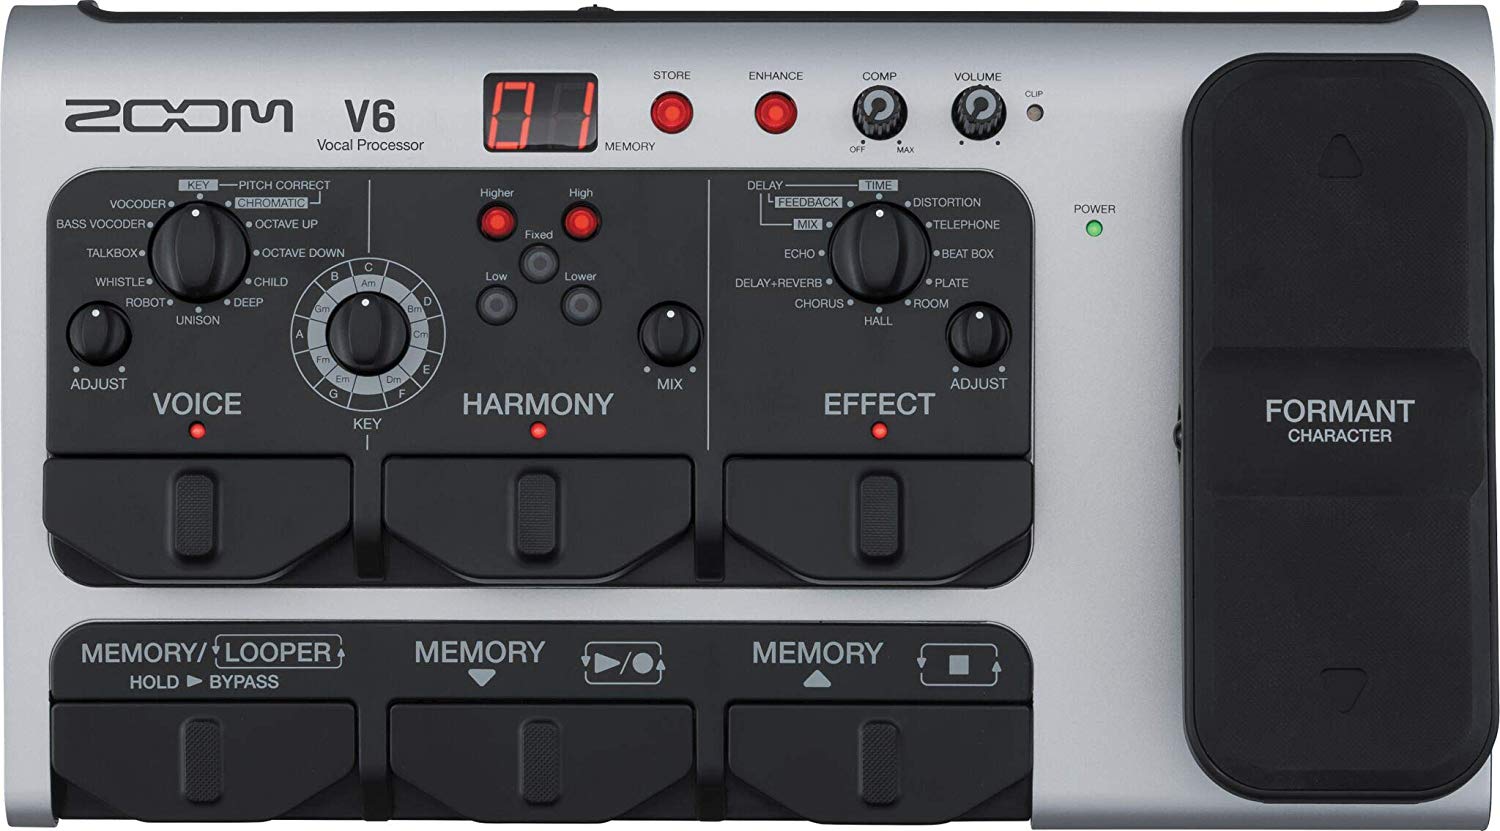 Zoom V6 Vocal Effects Pedal with Voice Processing Processor, Harmony, Effects, 40 Presets, Looper, and Included SGV-6 Shotgun Mic